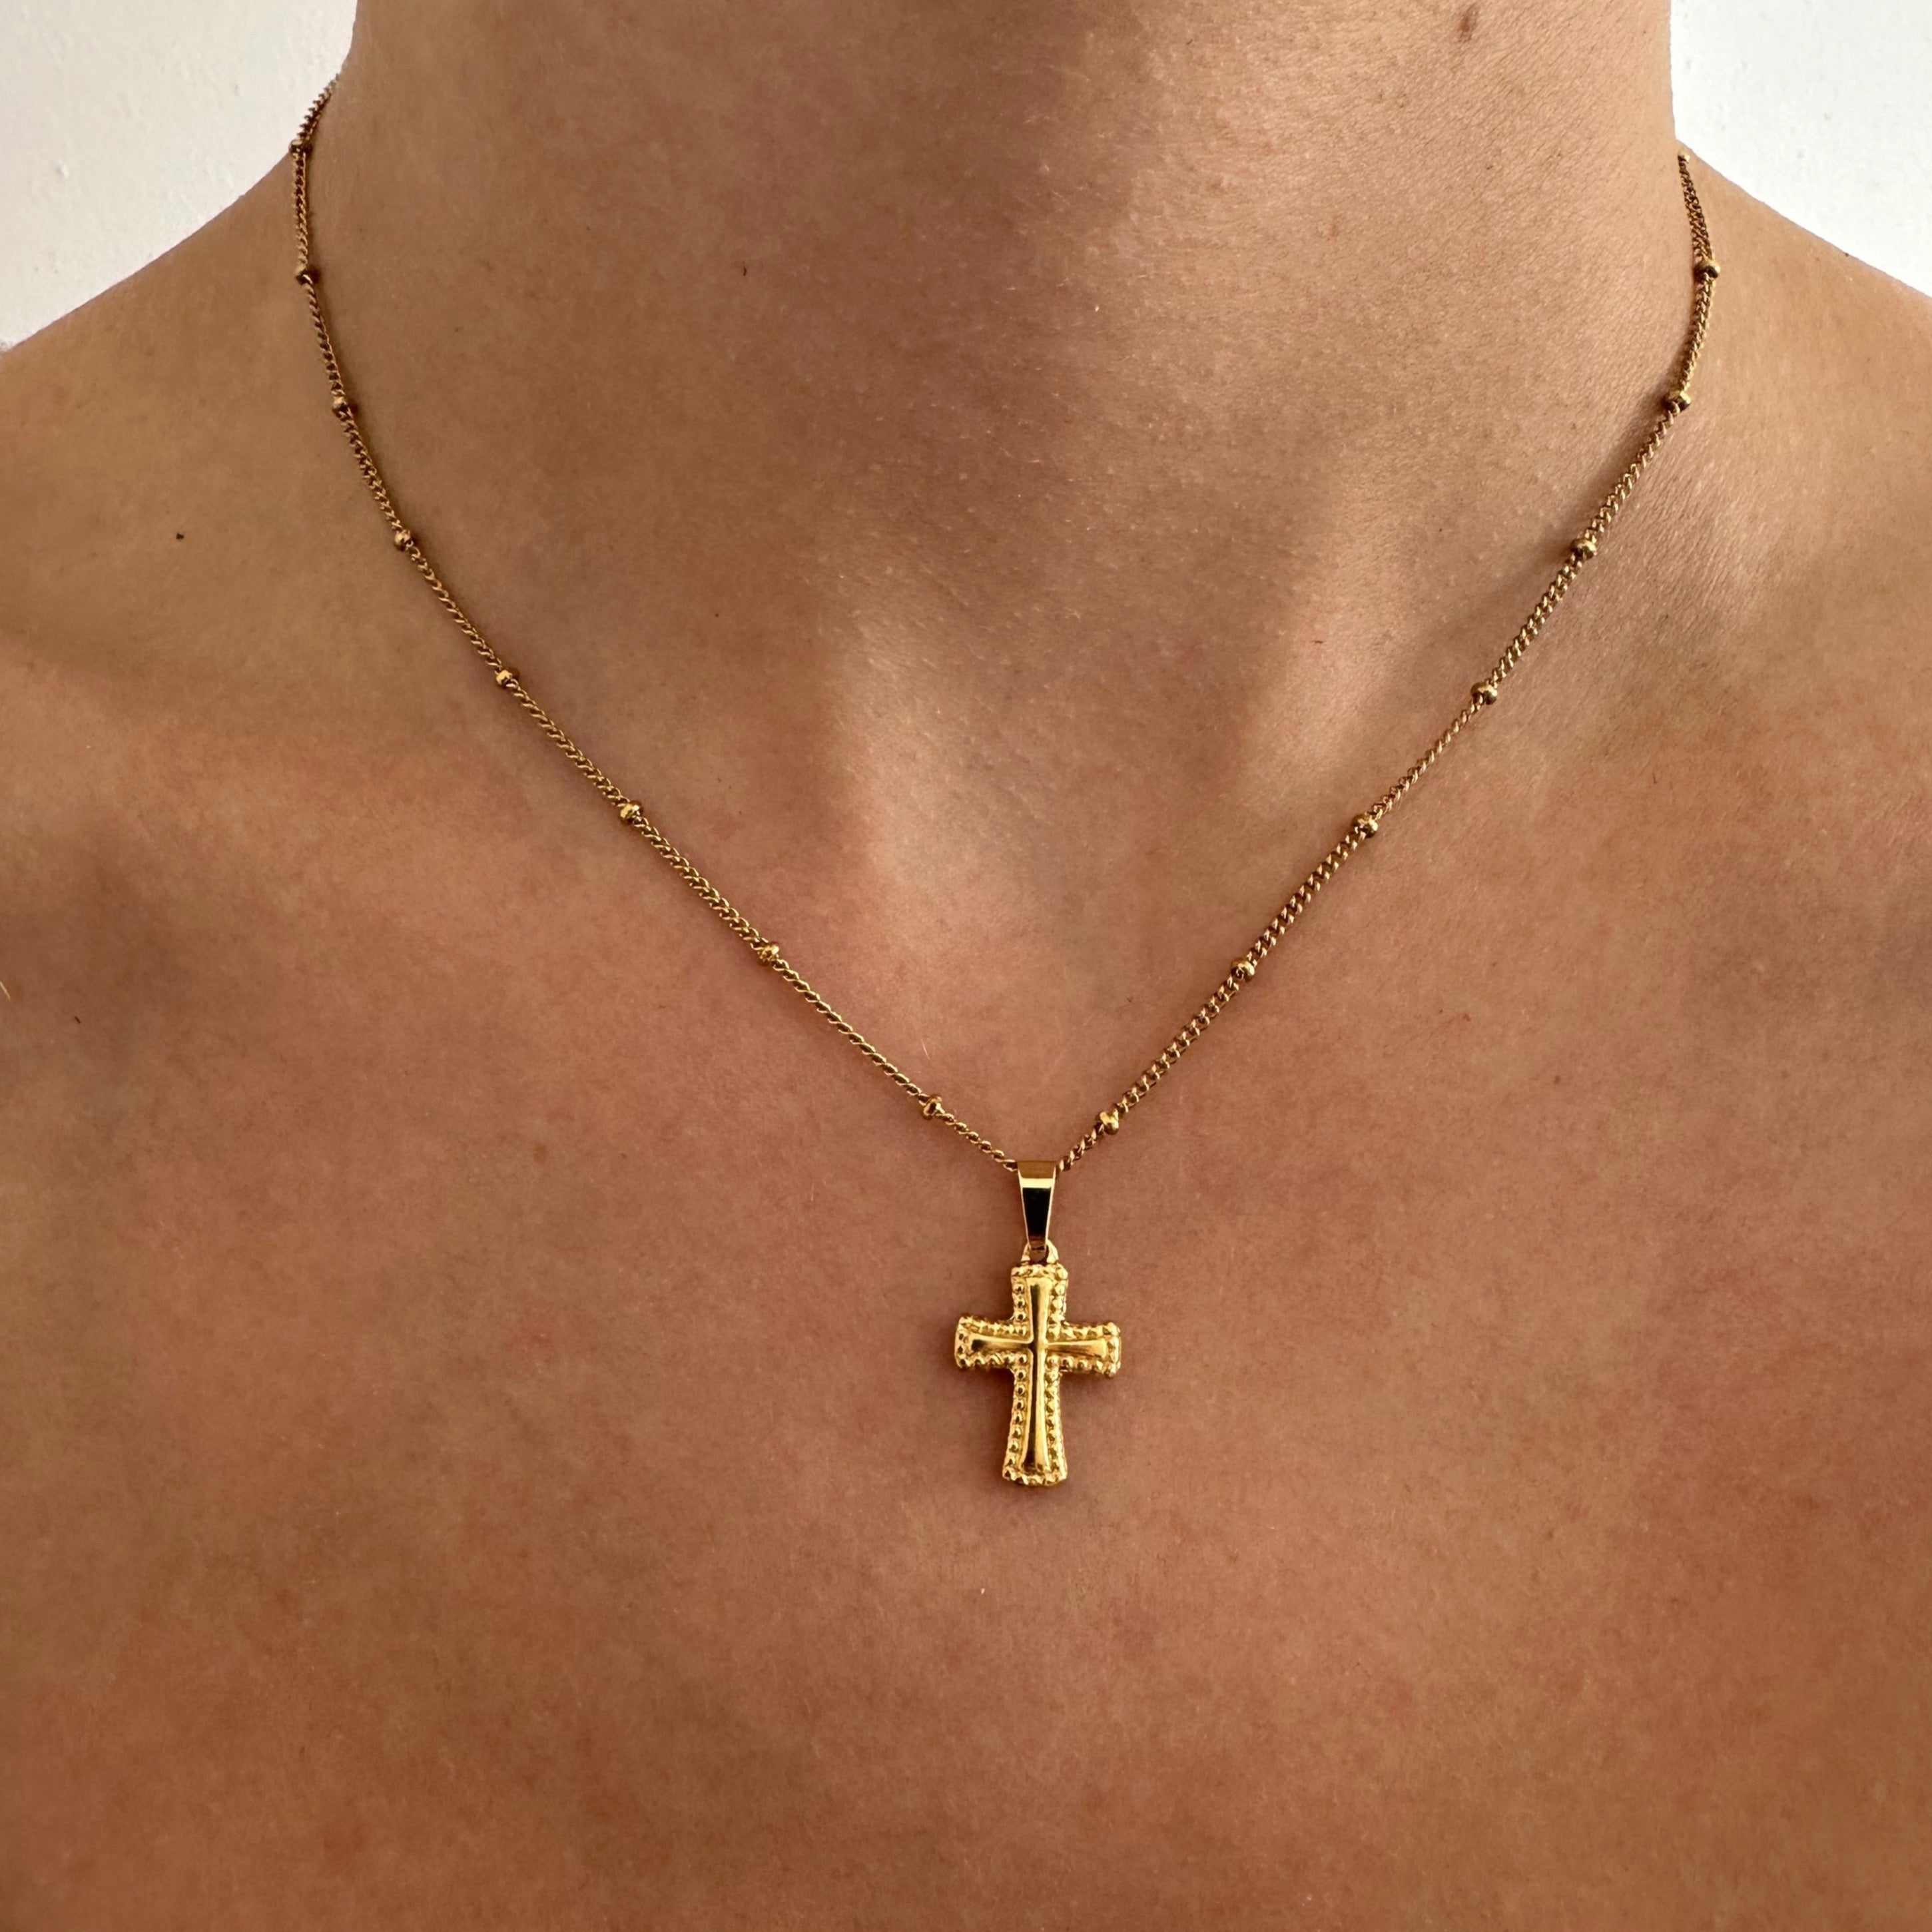 Gold Cross Necklace - Elegant jewelry accessory for women, featuring a stylish cross pendant on a gold chain.